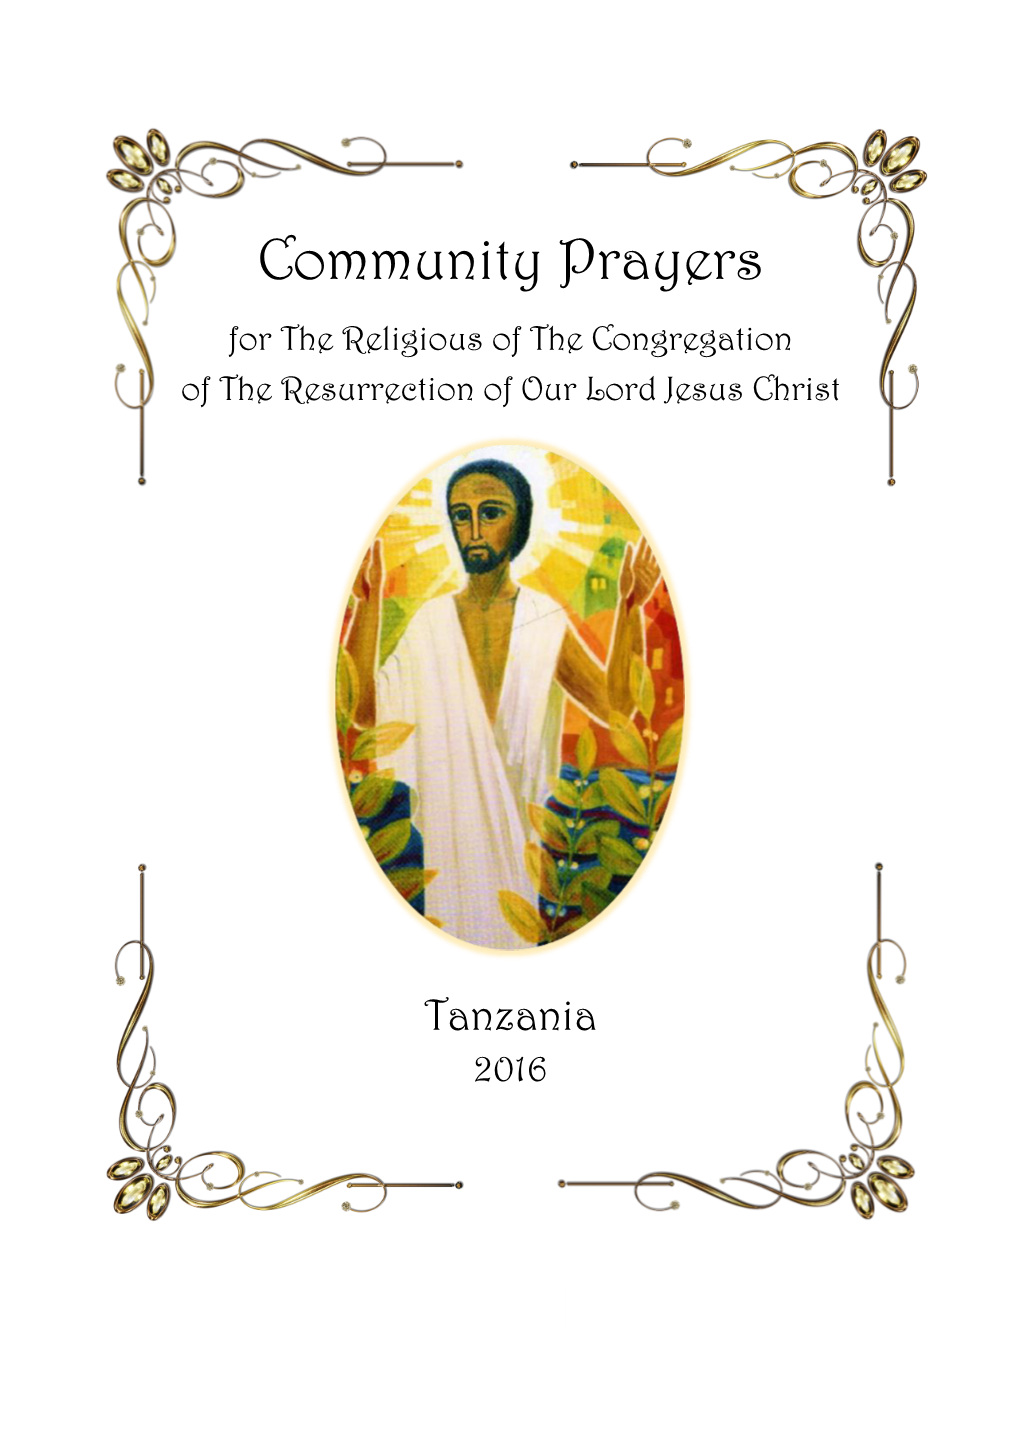 Community Prayers for the Religious of the Congregation of the Resurrection of Our Lord Jesus Christ